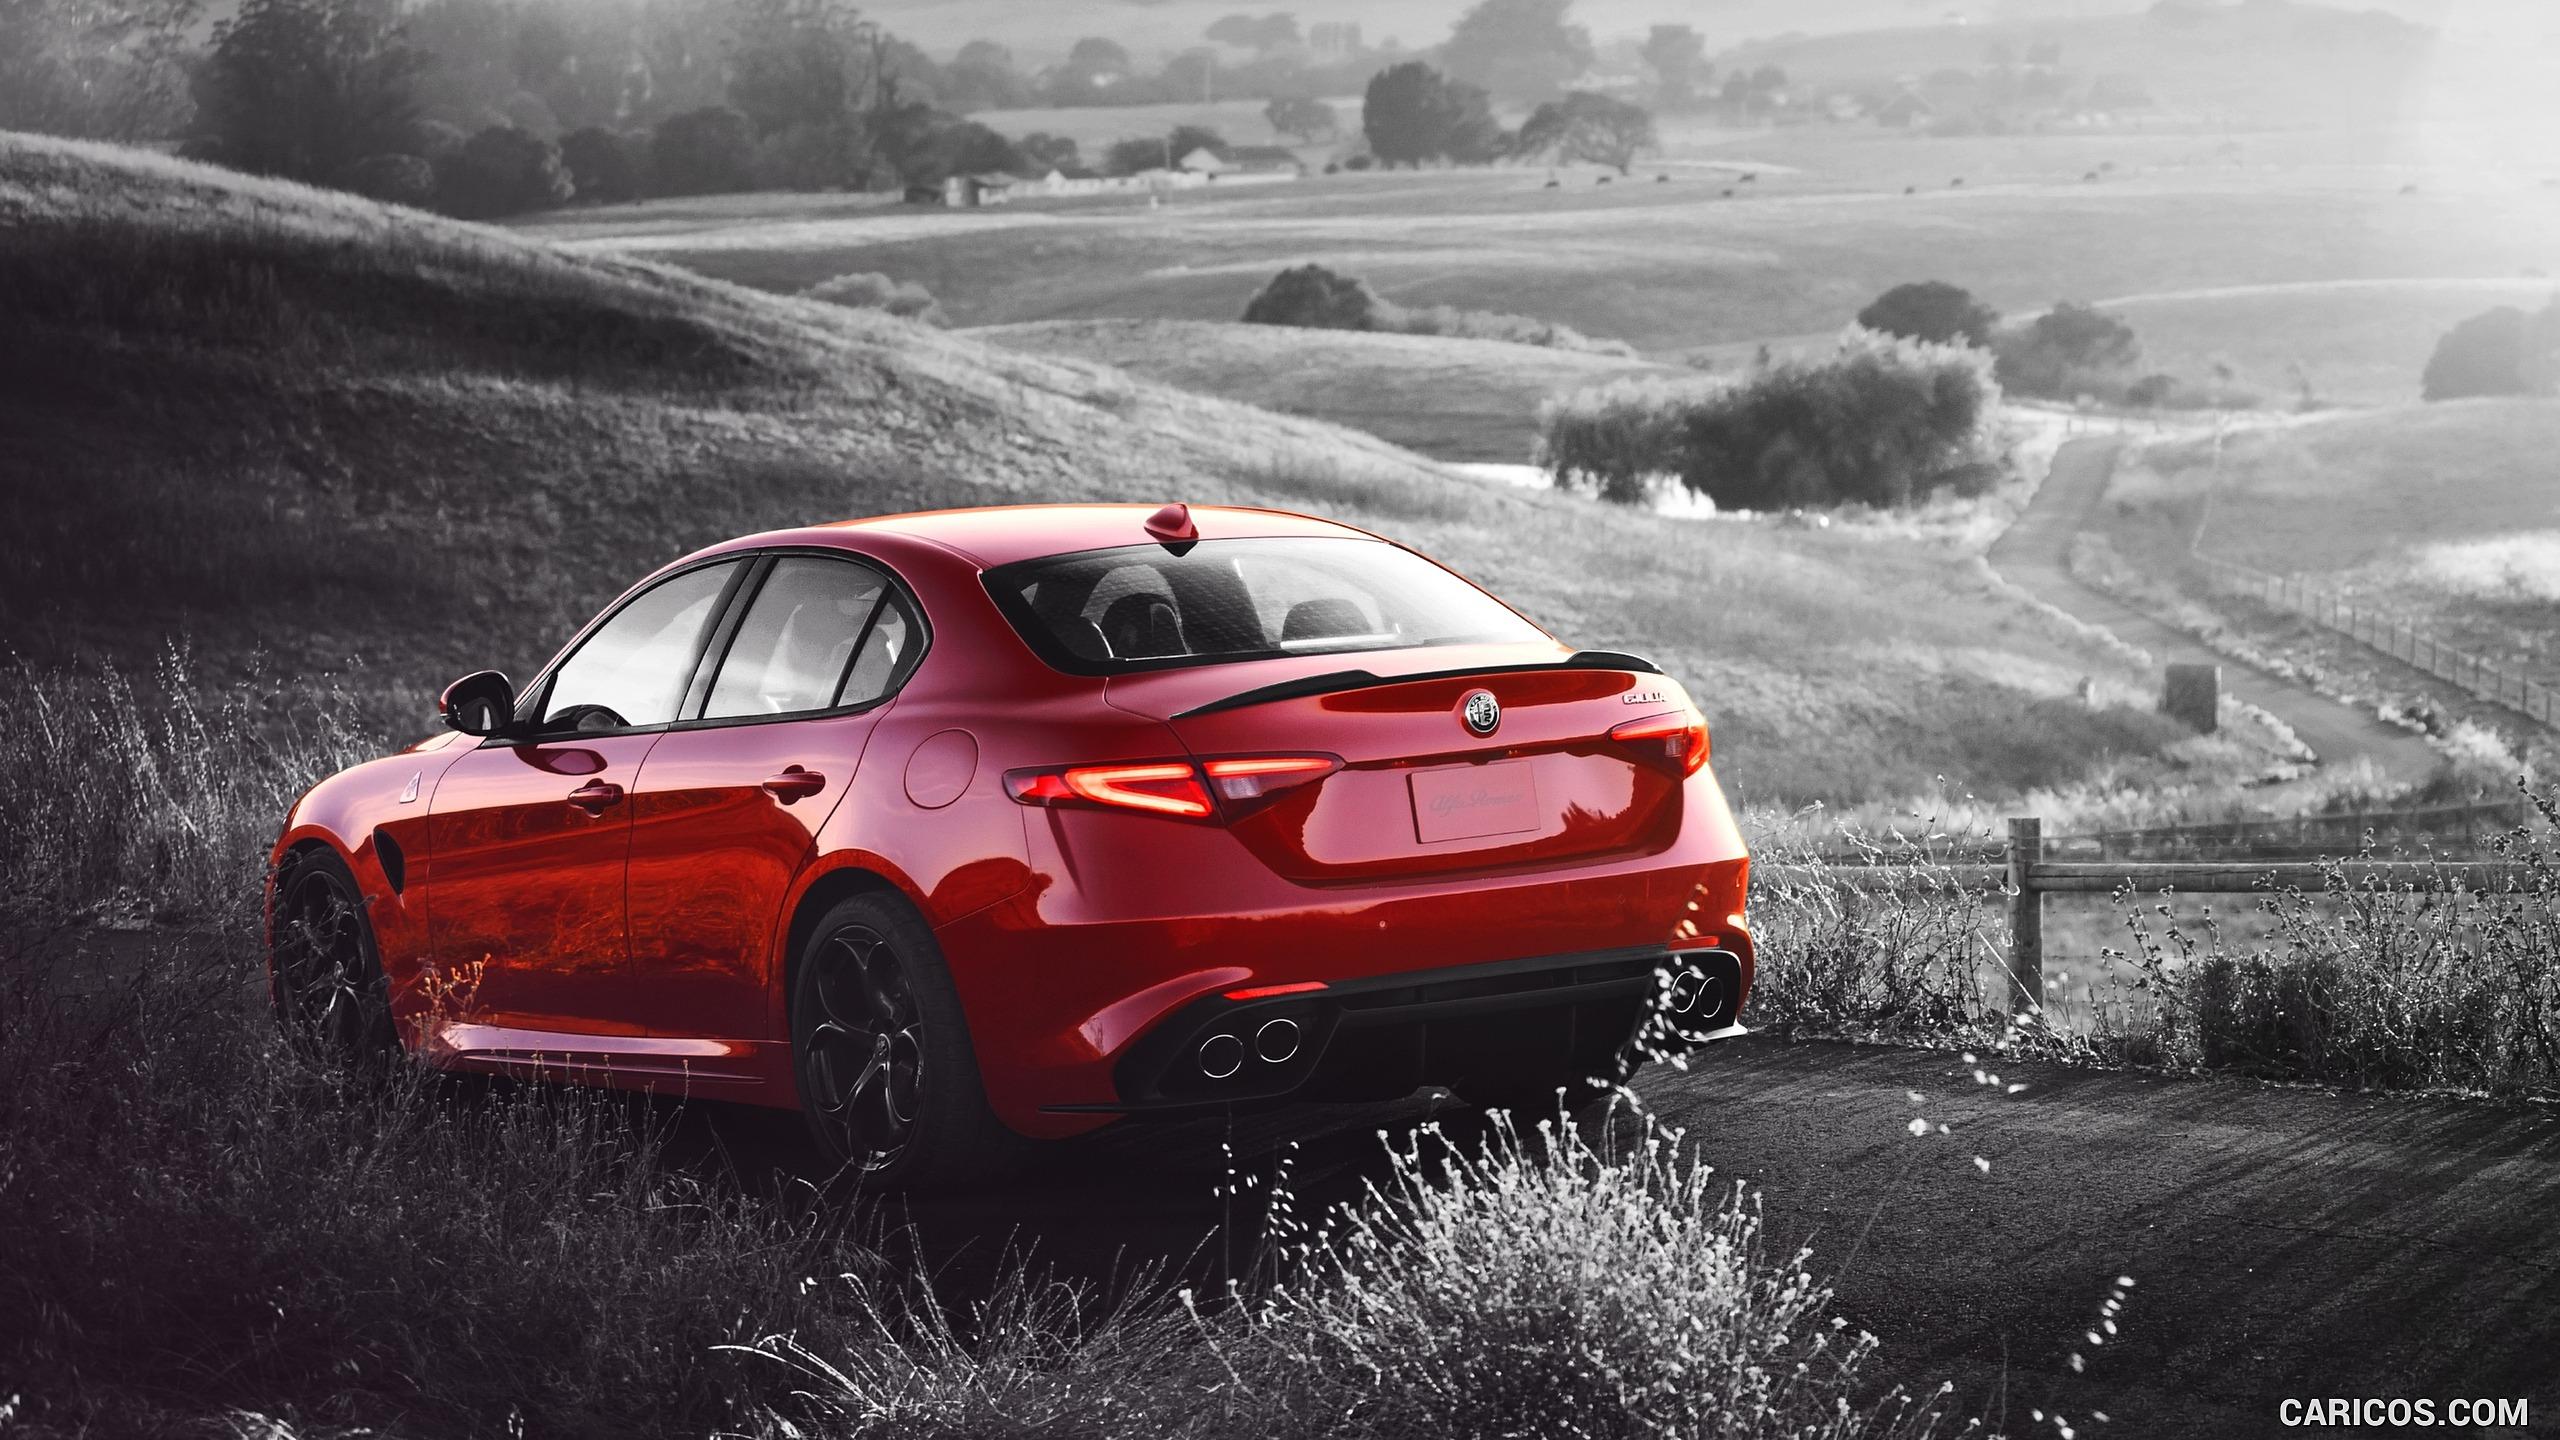 Free download Alfa Romeo Wallpaper and Background Image stmednet